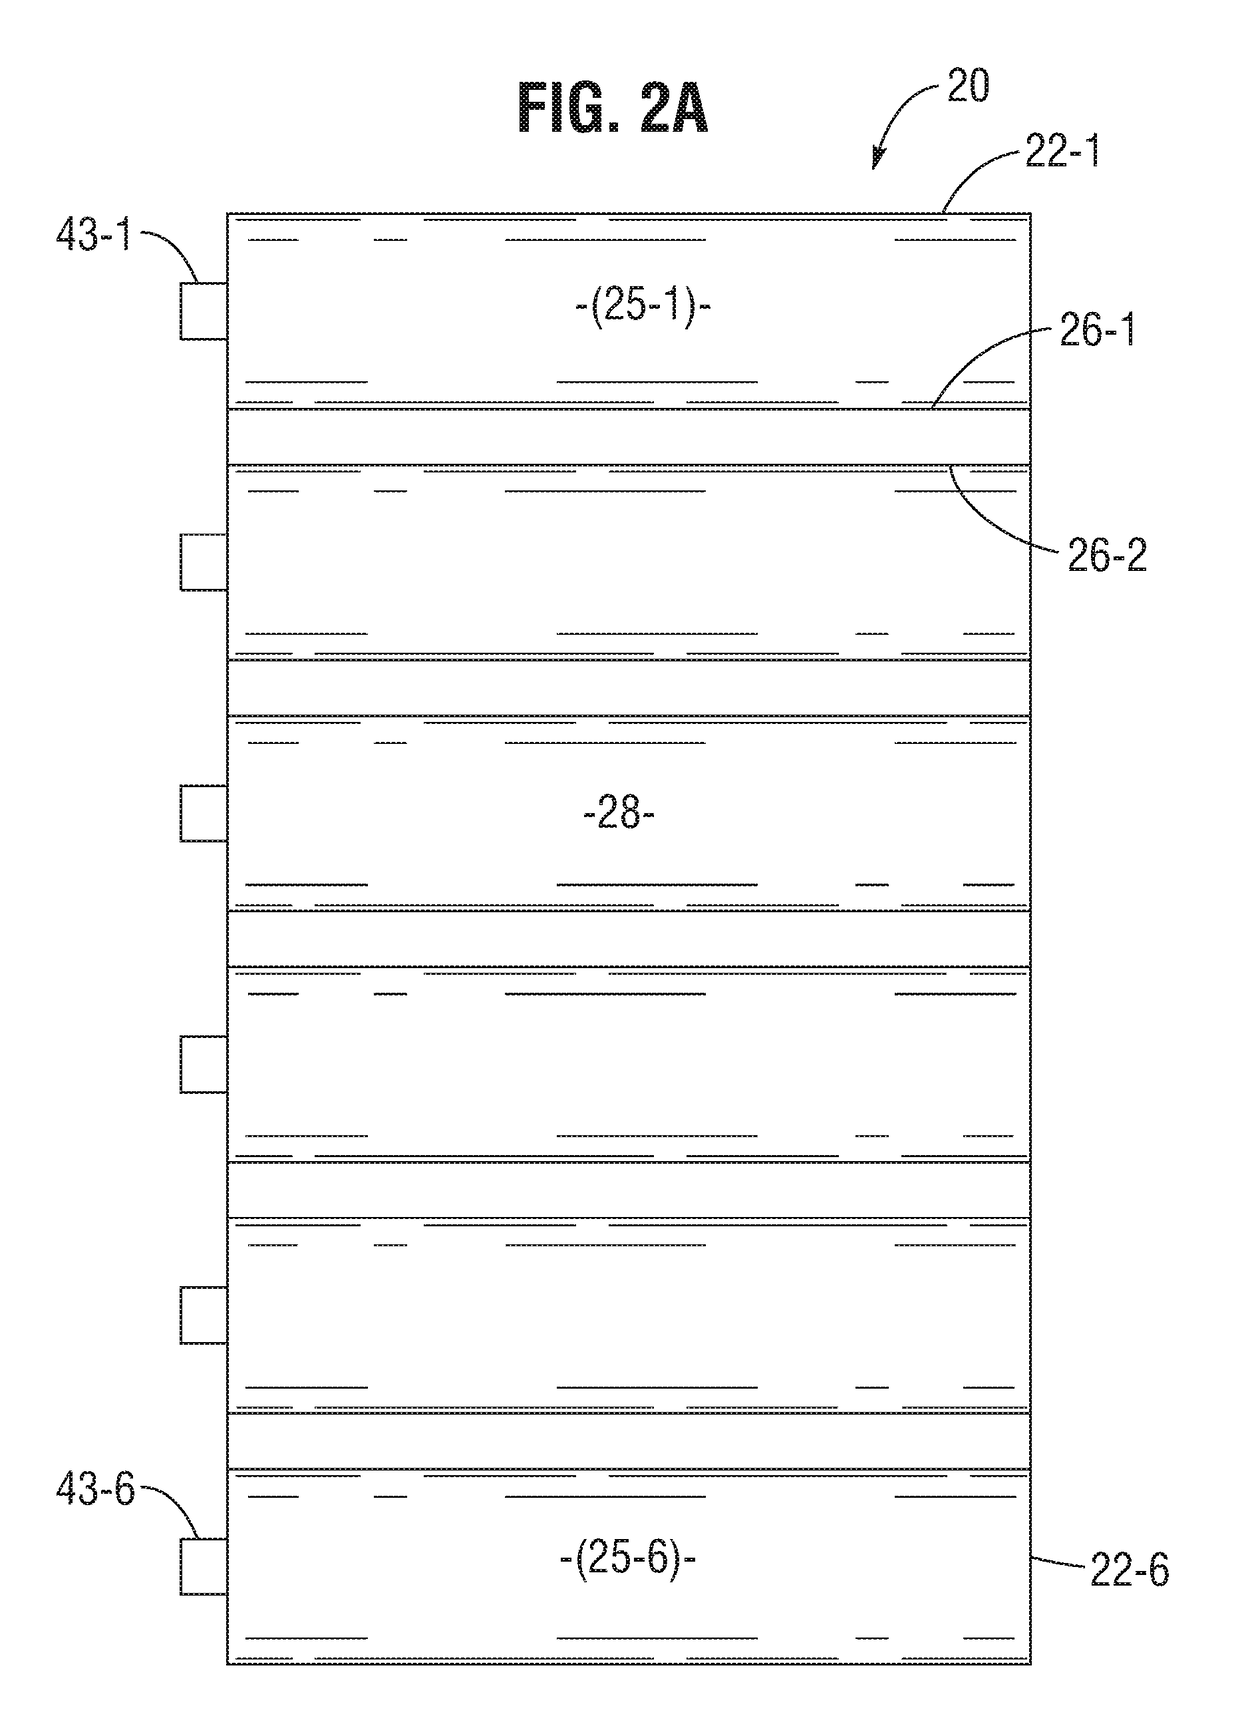 Traveling wave air mattresses and method and apparatus for generating traveling waves thereon